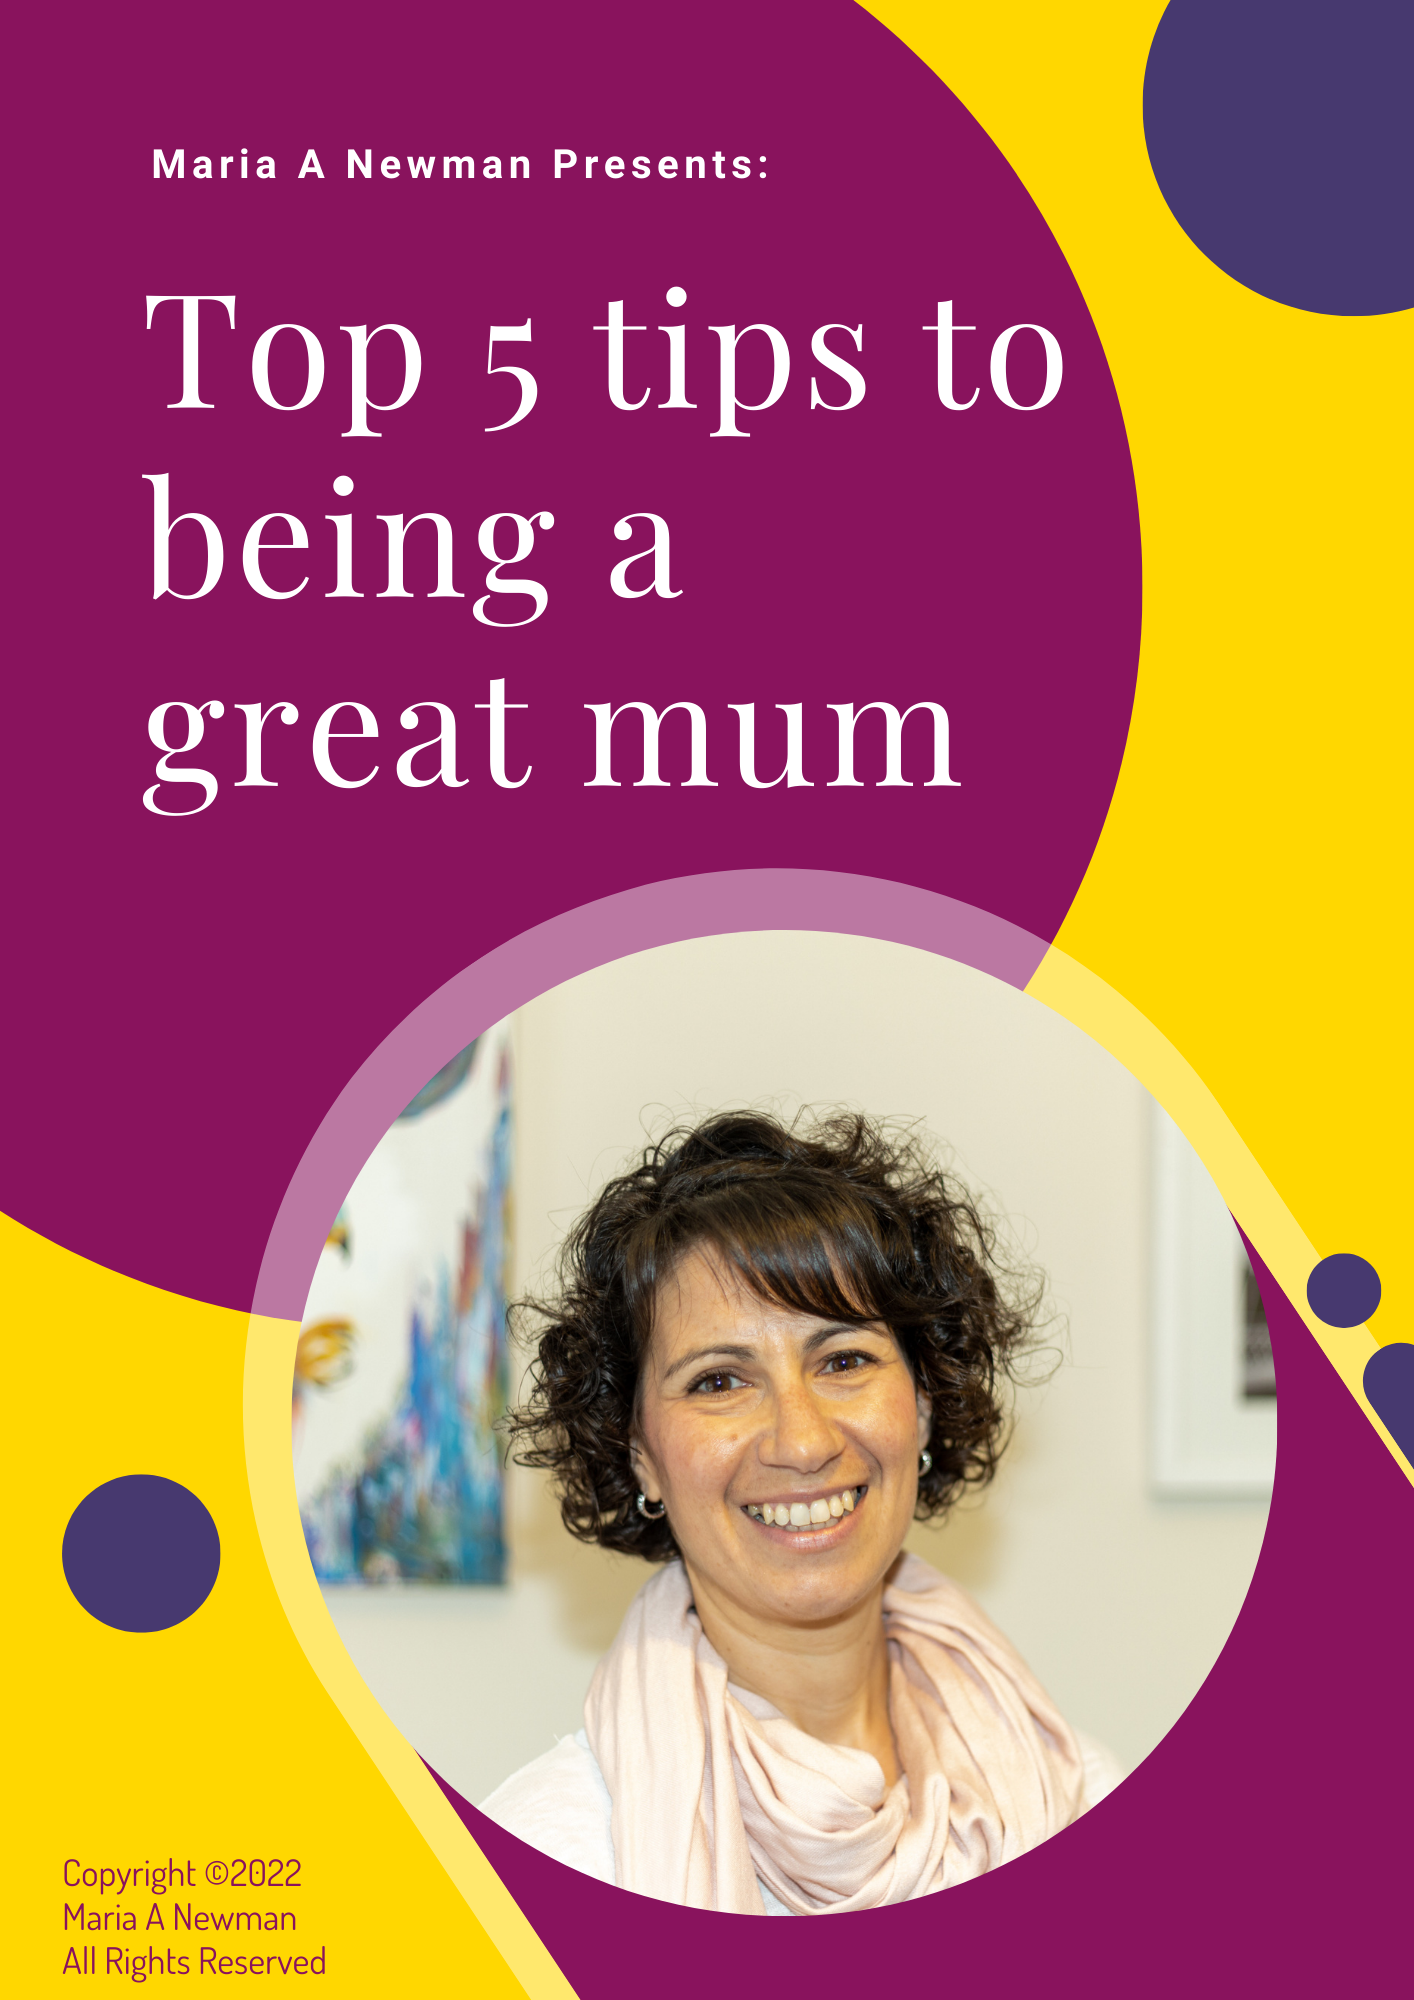 Top 5 tips to being a great mum